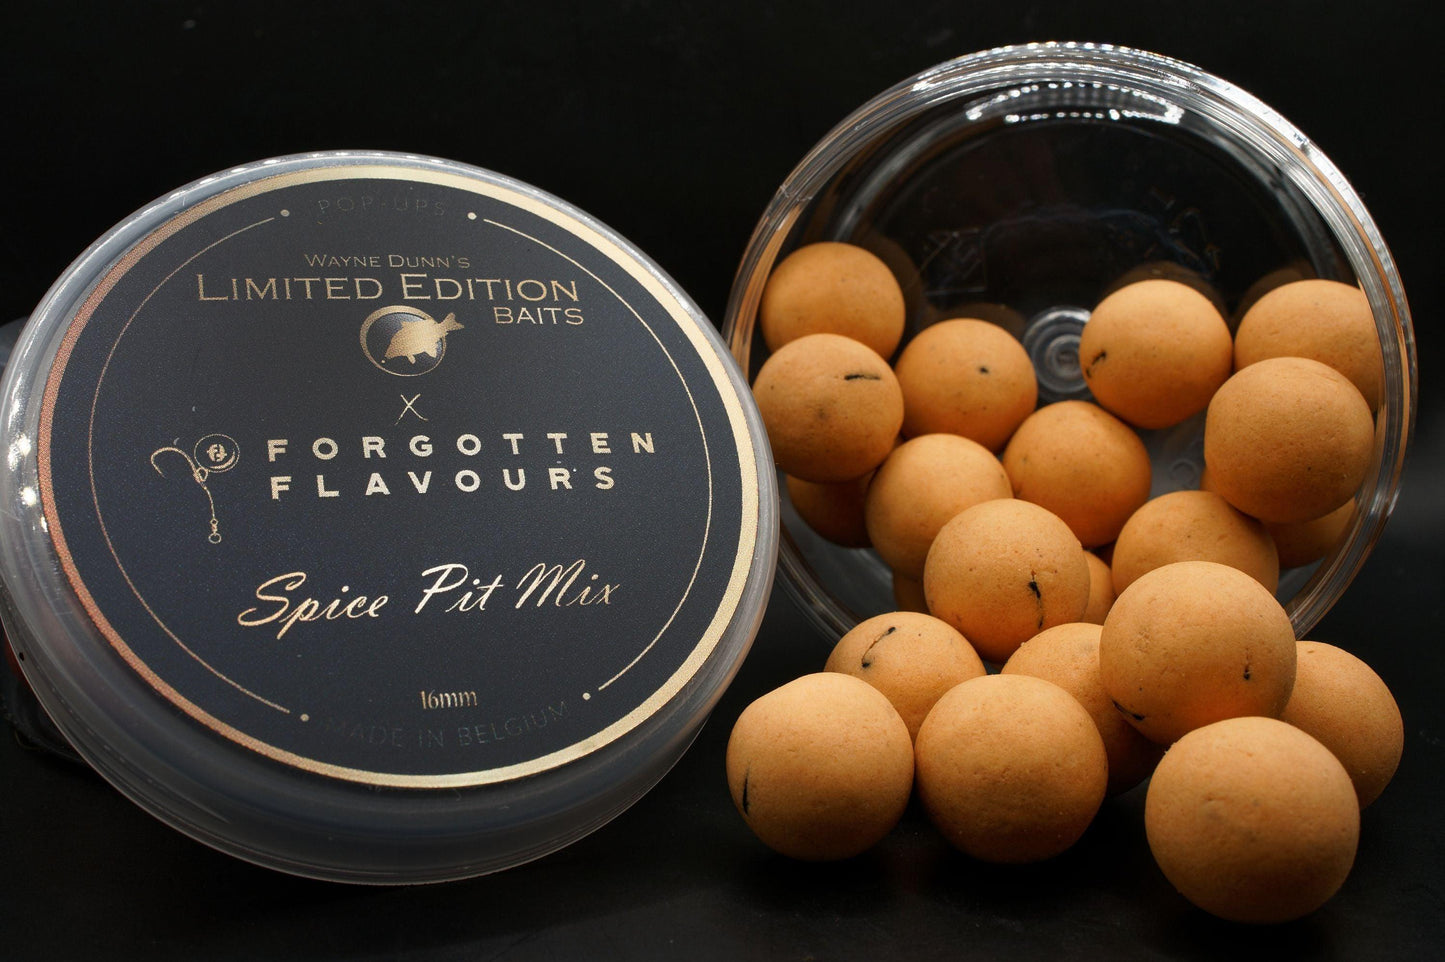 Wayne Dunn's LTD Ed. France collab pop-ups Spice Pit Mix - Forgotten Flavours & On Point